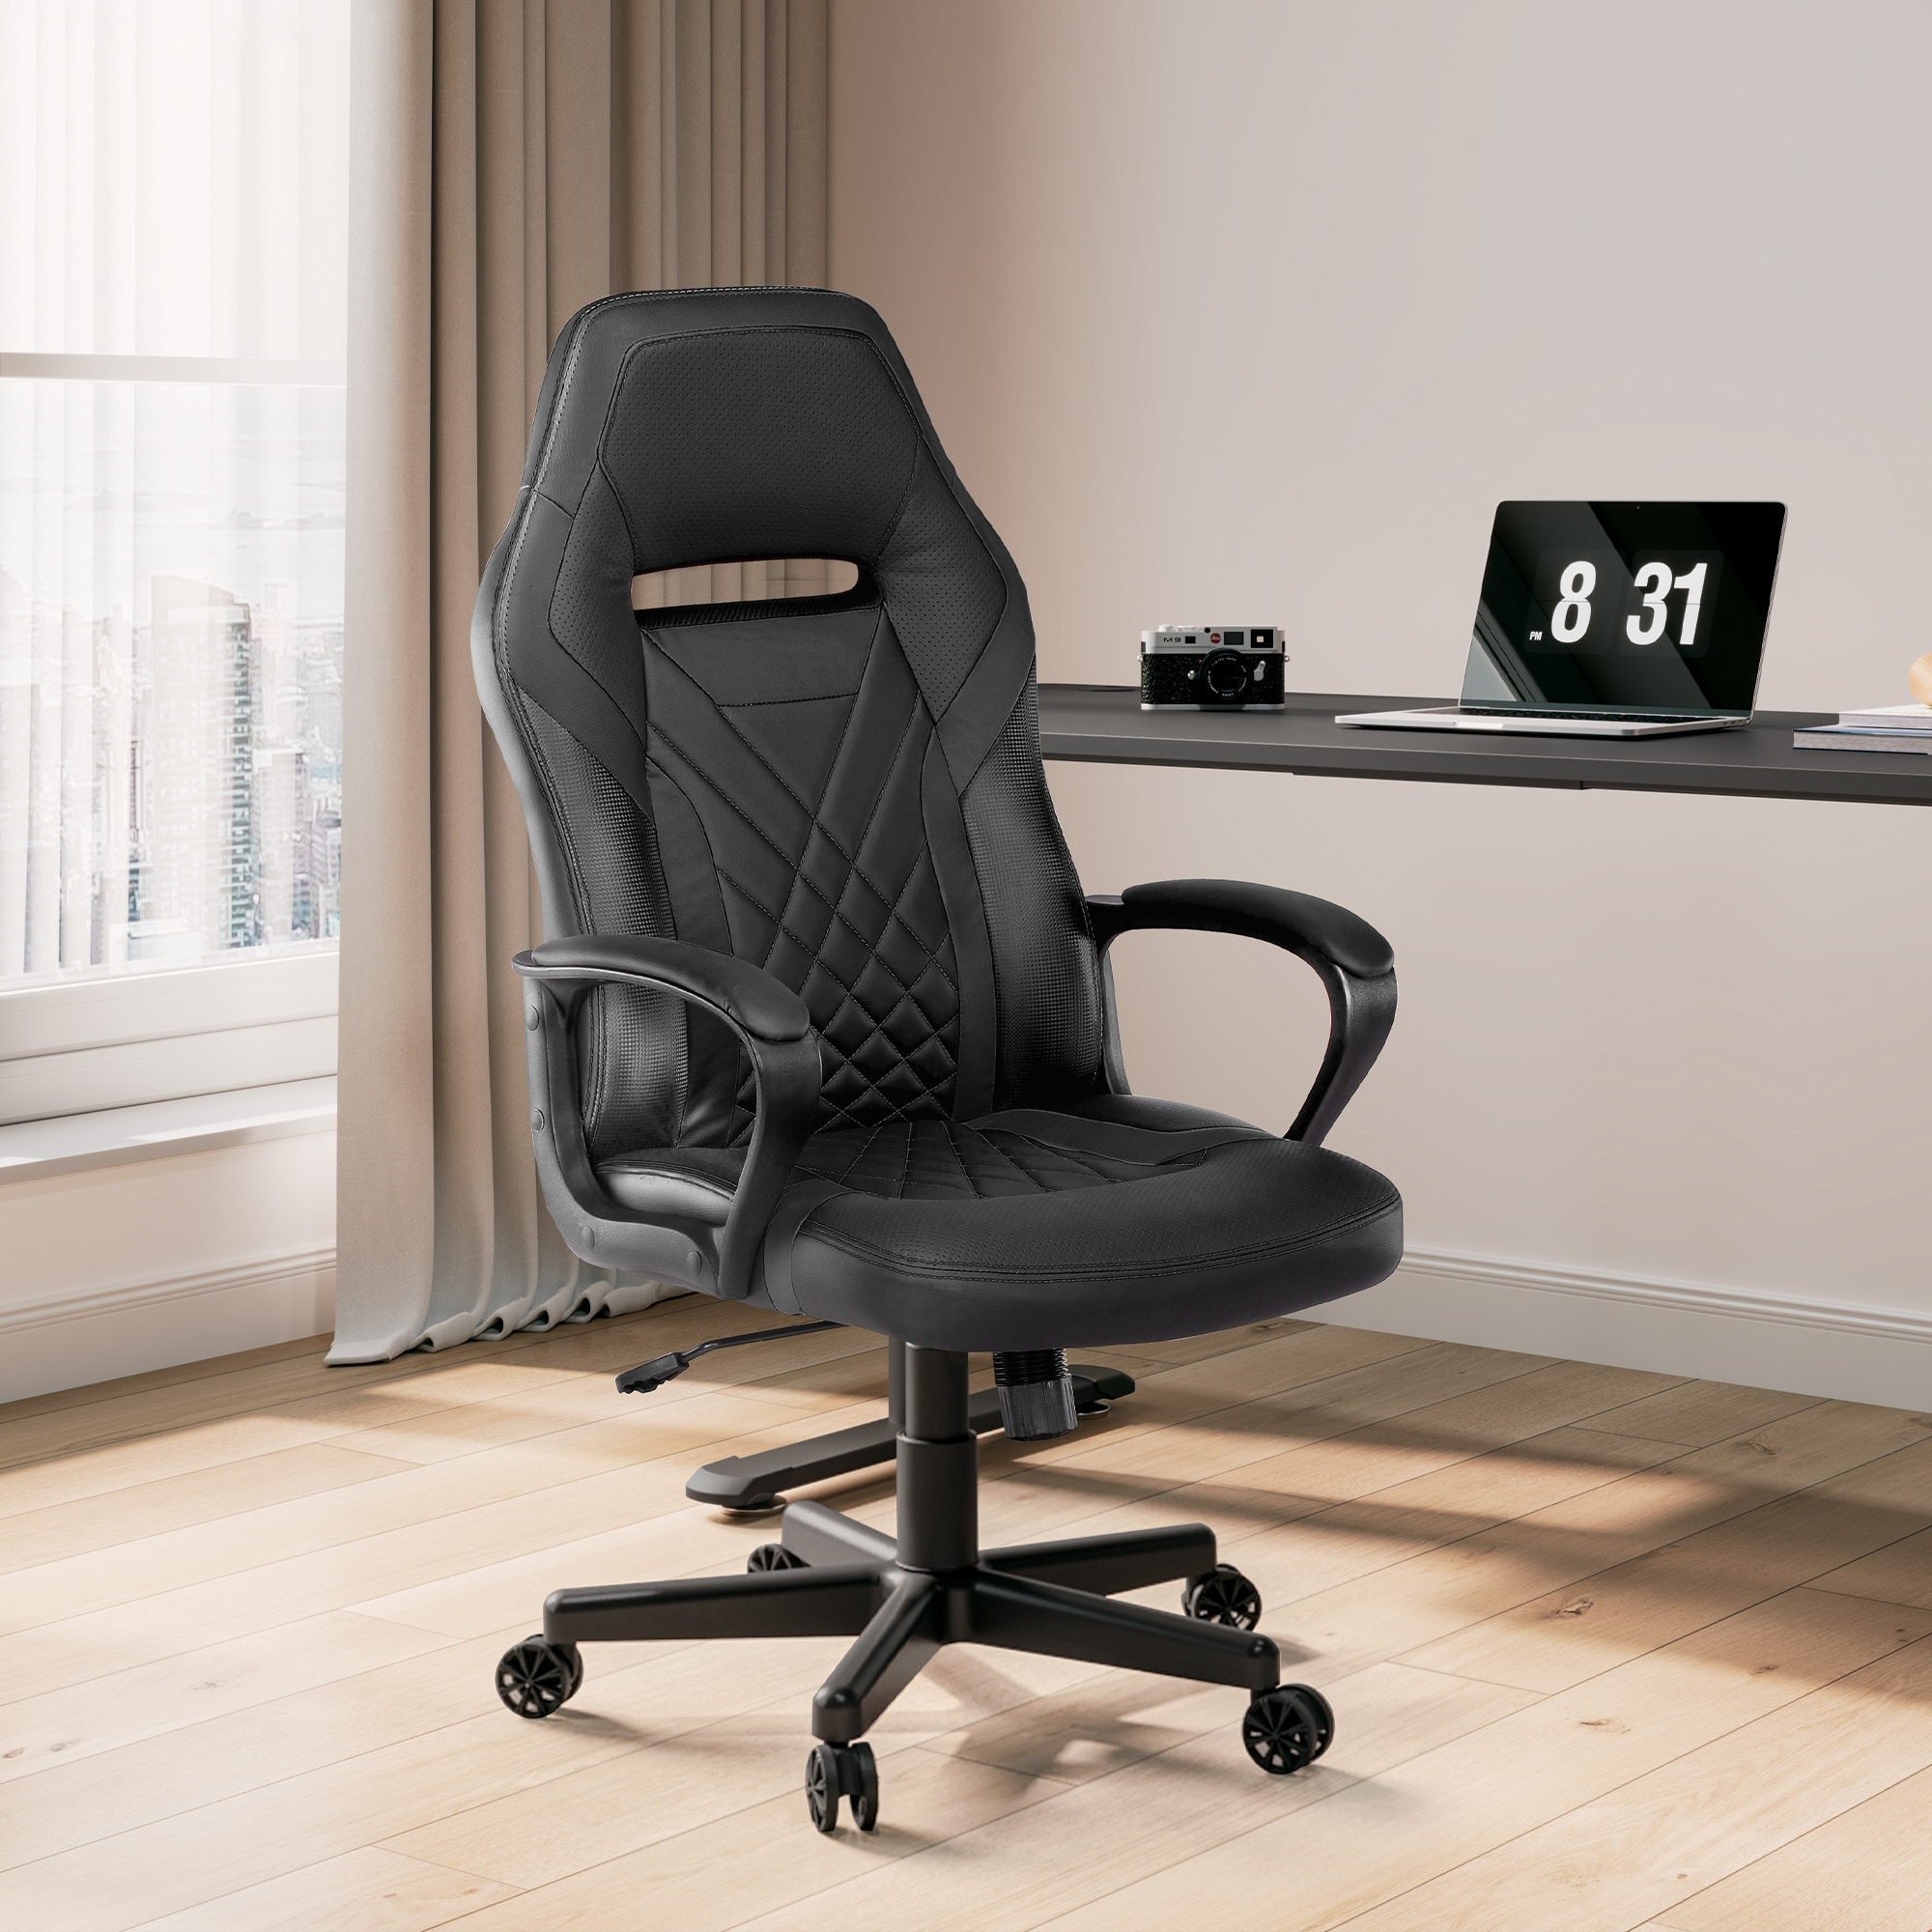 https://ak1.ostkcdn.com/images/products/is/images/direct/153217ff4743aaf397c452c14b2e46a43ce5bf85/Eureka-Ergonomic-PU-Leather-Gaming-Chair-Home-Office-Computer-Chair-with-Hearest%2C-Lumbar-Support.jpg